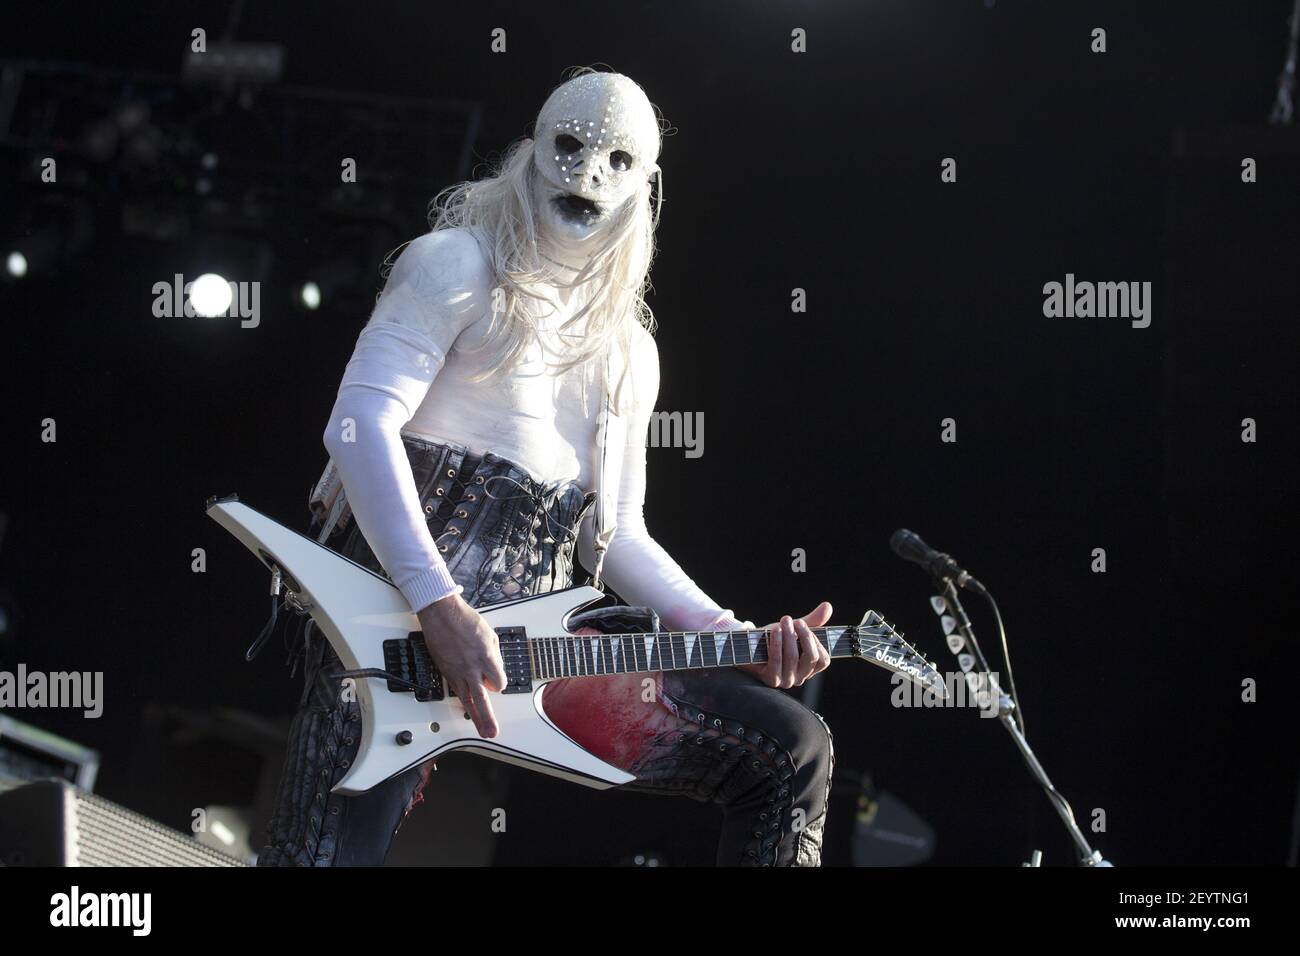 26 May 2012 - Lisbon, Portugal - Limp Bizkit guitarist Wes Borland  preforming on the second day of